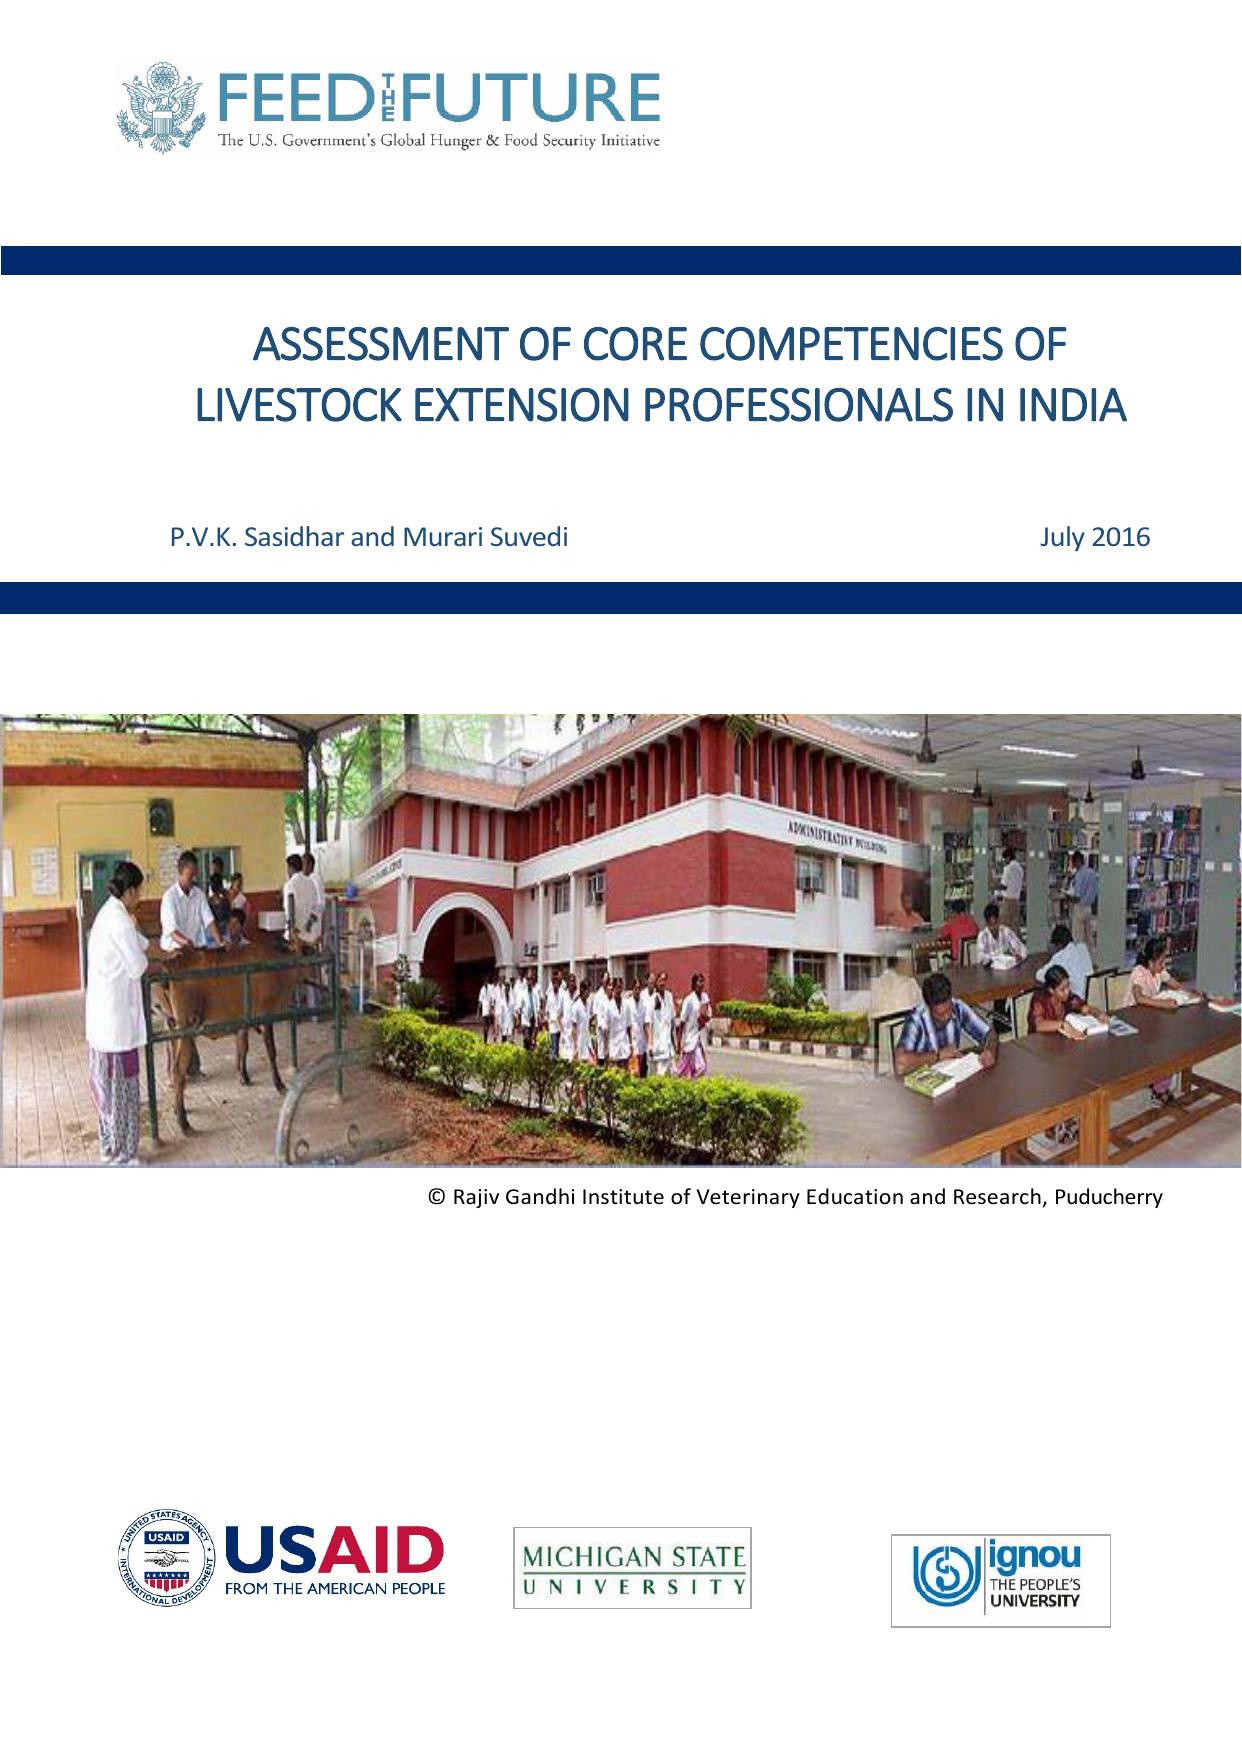 ASSESSMENT OF CORE COMPETENCIES OF LIVESTOCK EXTENSION PROFESSIONALS IN INDIA 2016